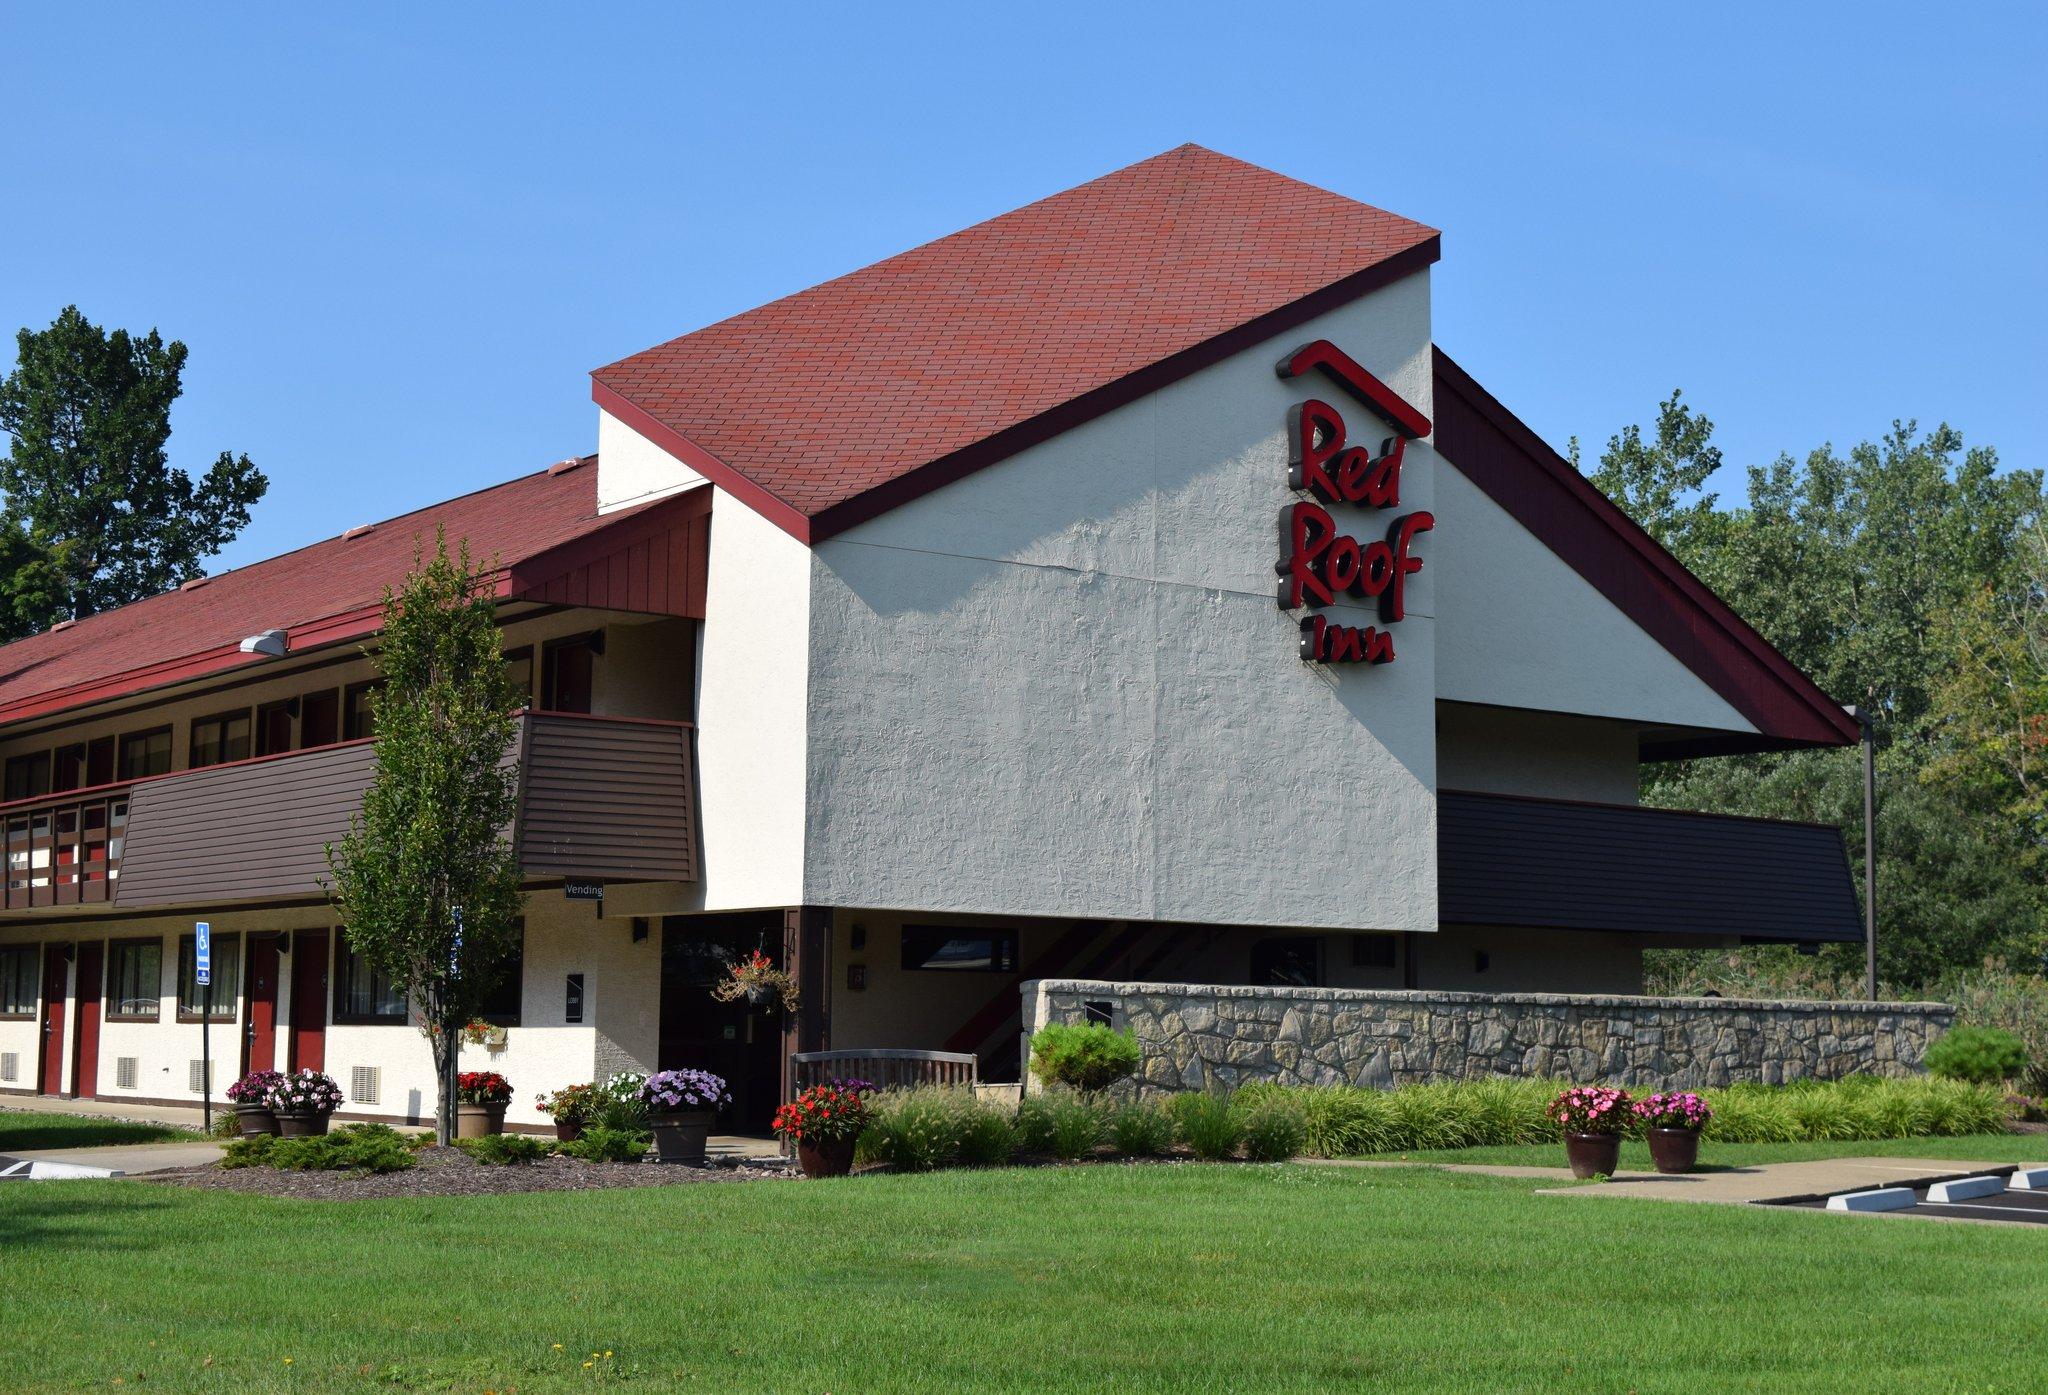 Red Roof Inn Buffalo - Niagara Airport in Bowmansville, NY